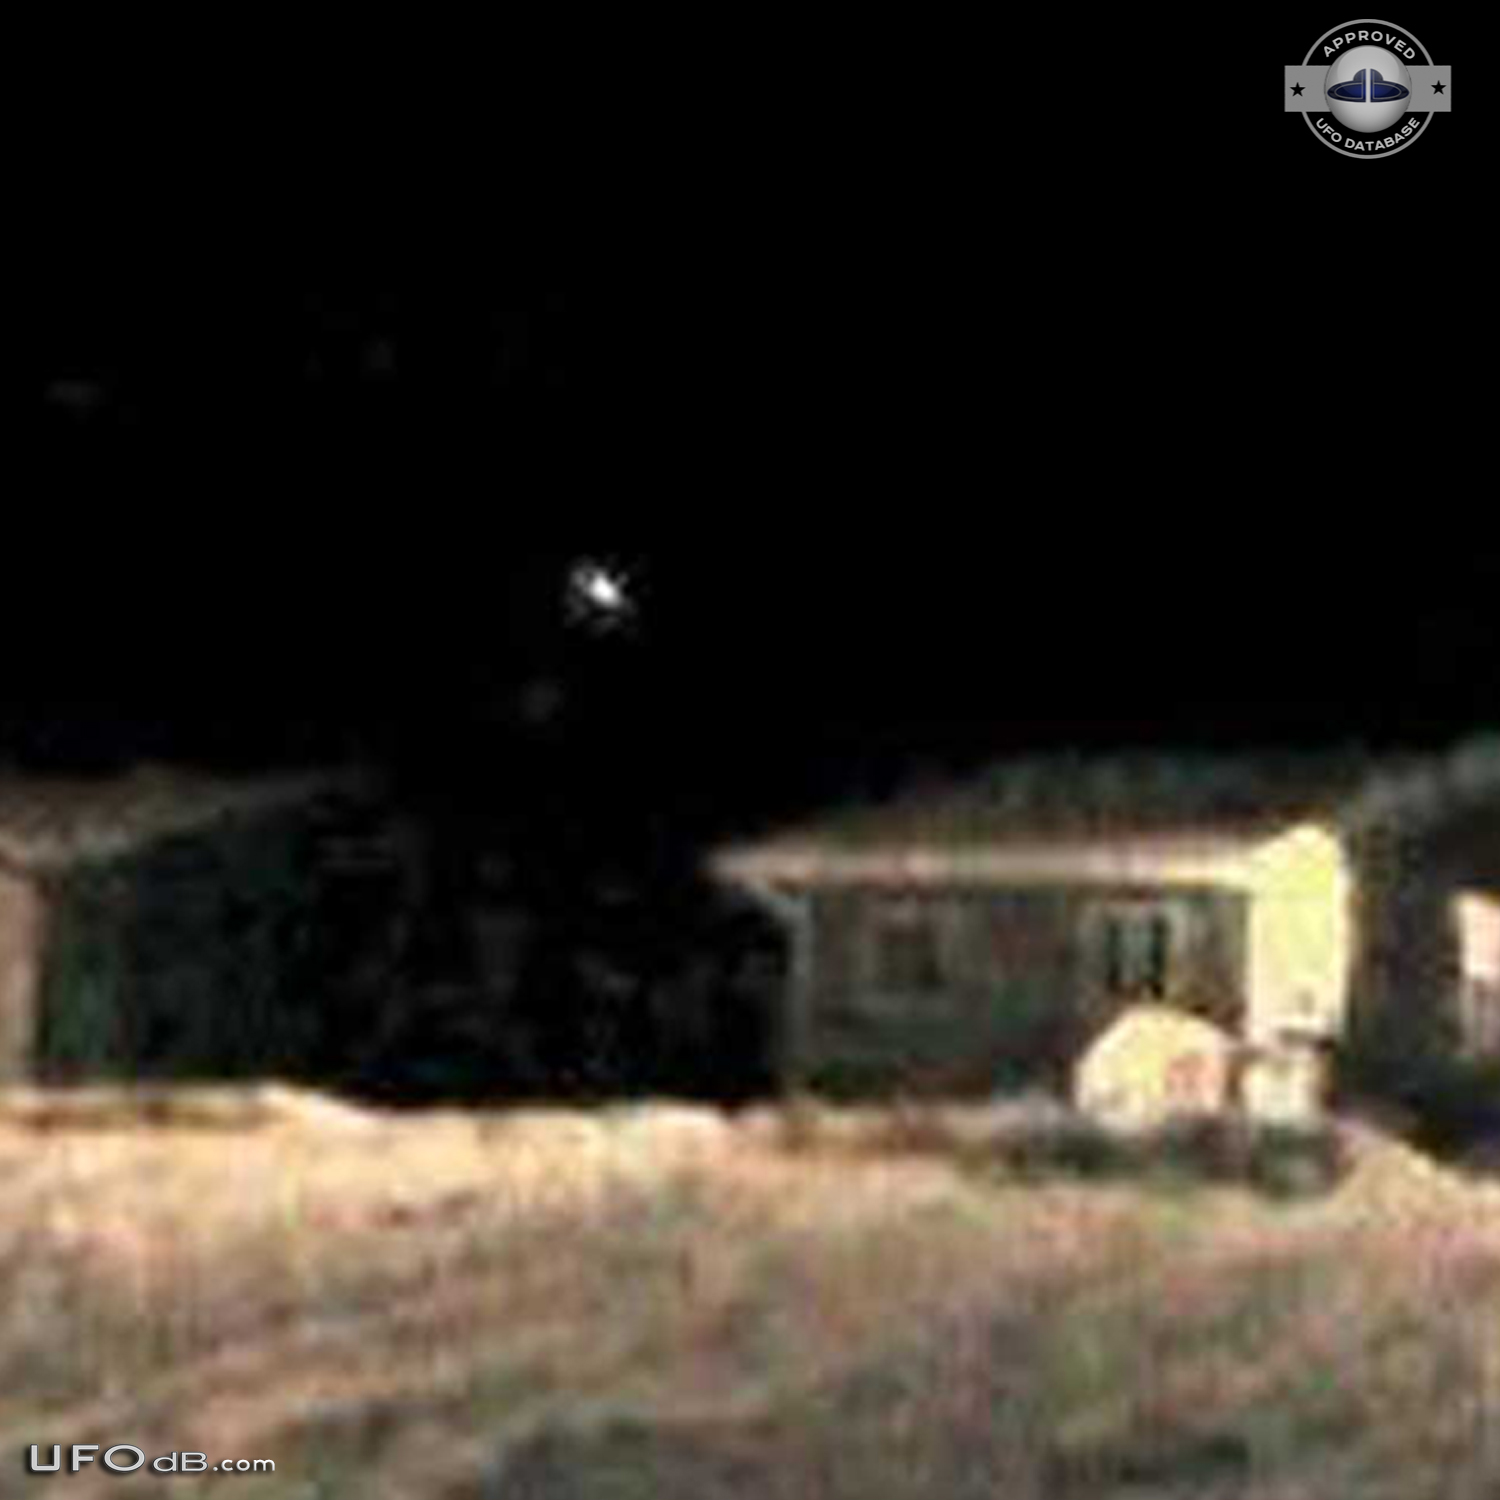 Much too low to be a star - UFO picture in Saskatchewan, Canada 2012 UFO Picture #403-3